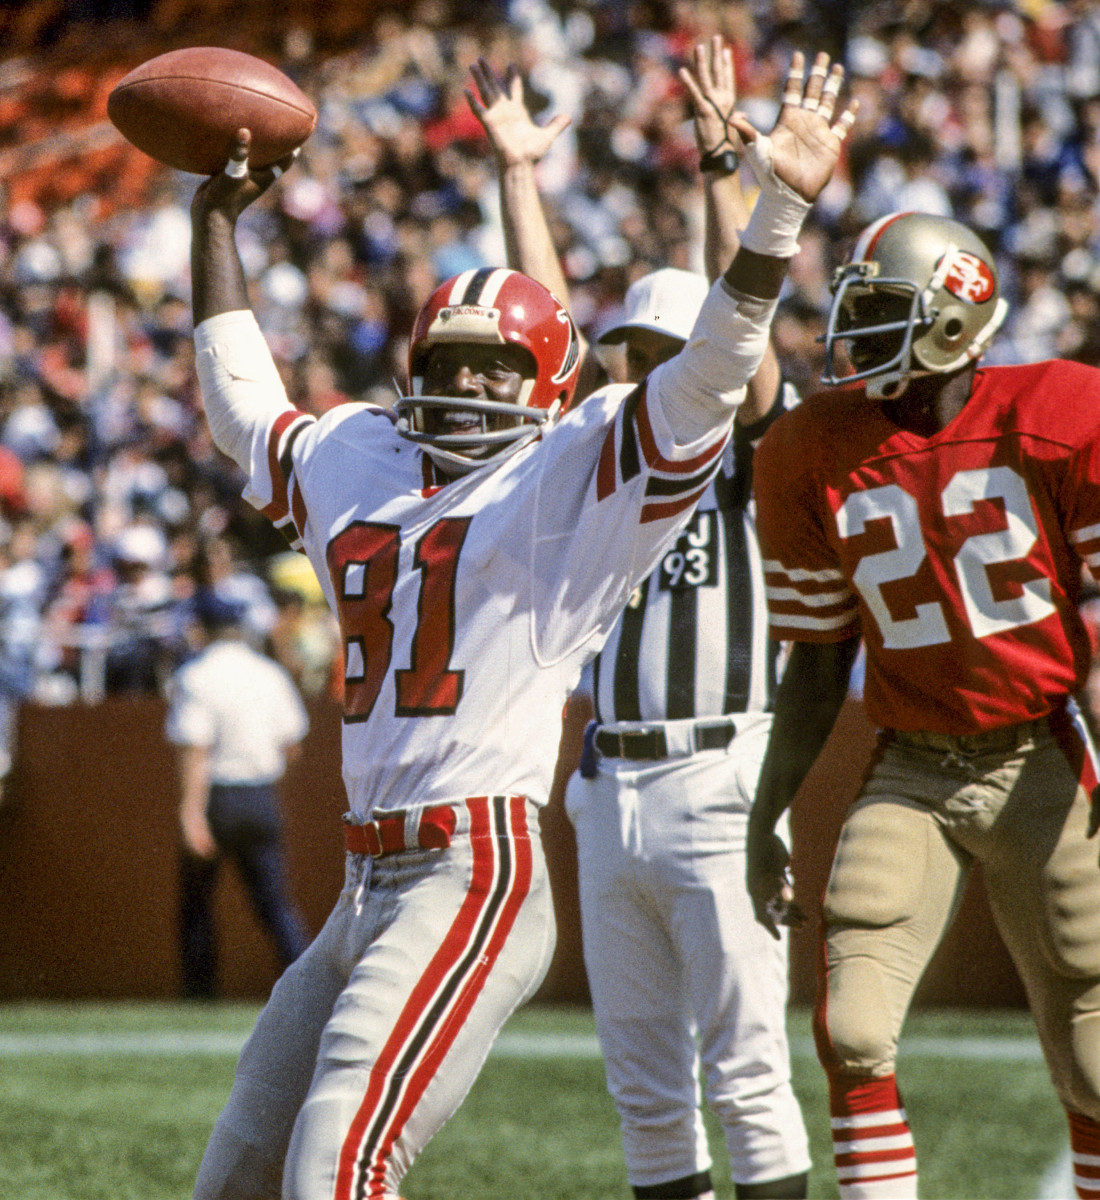 The allure of the NFL, embodied in one man: Billy "White Shoes" Johnson.